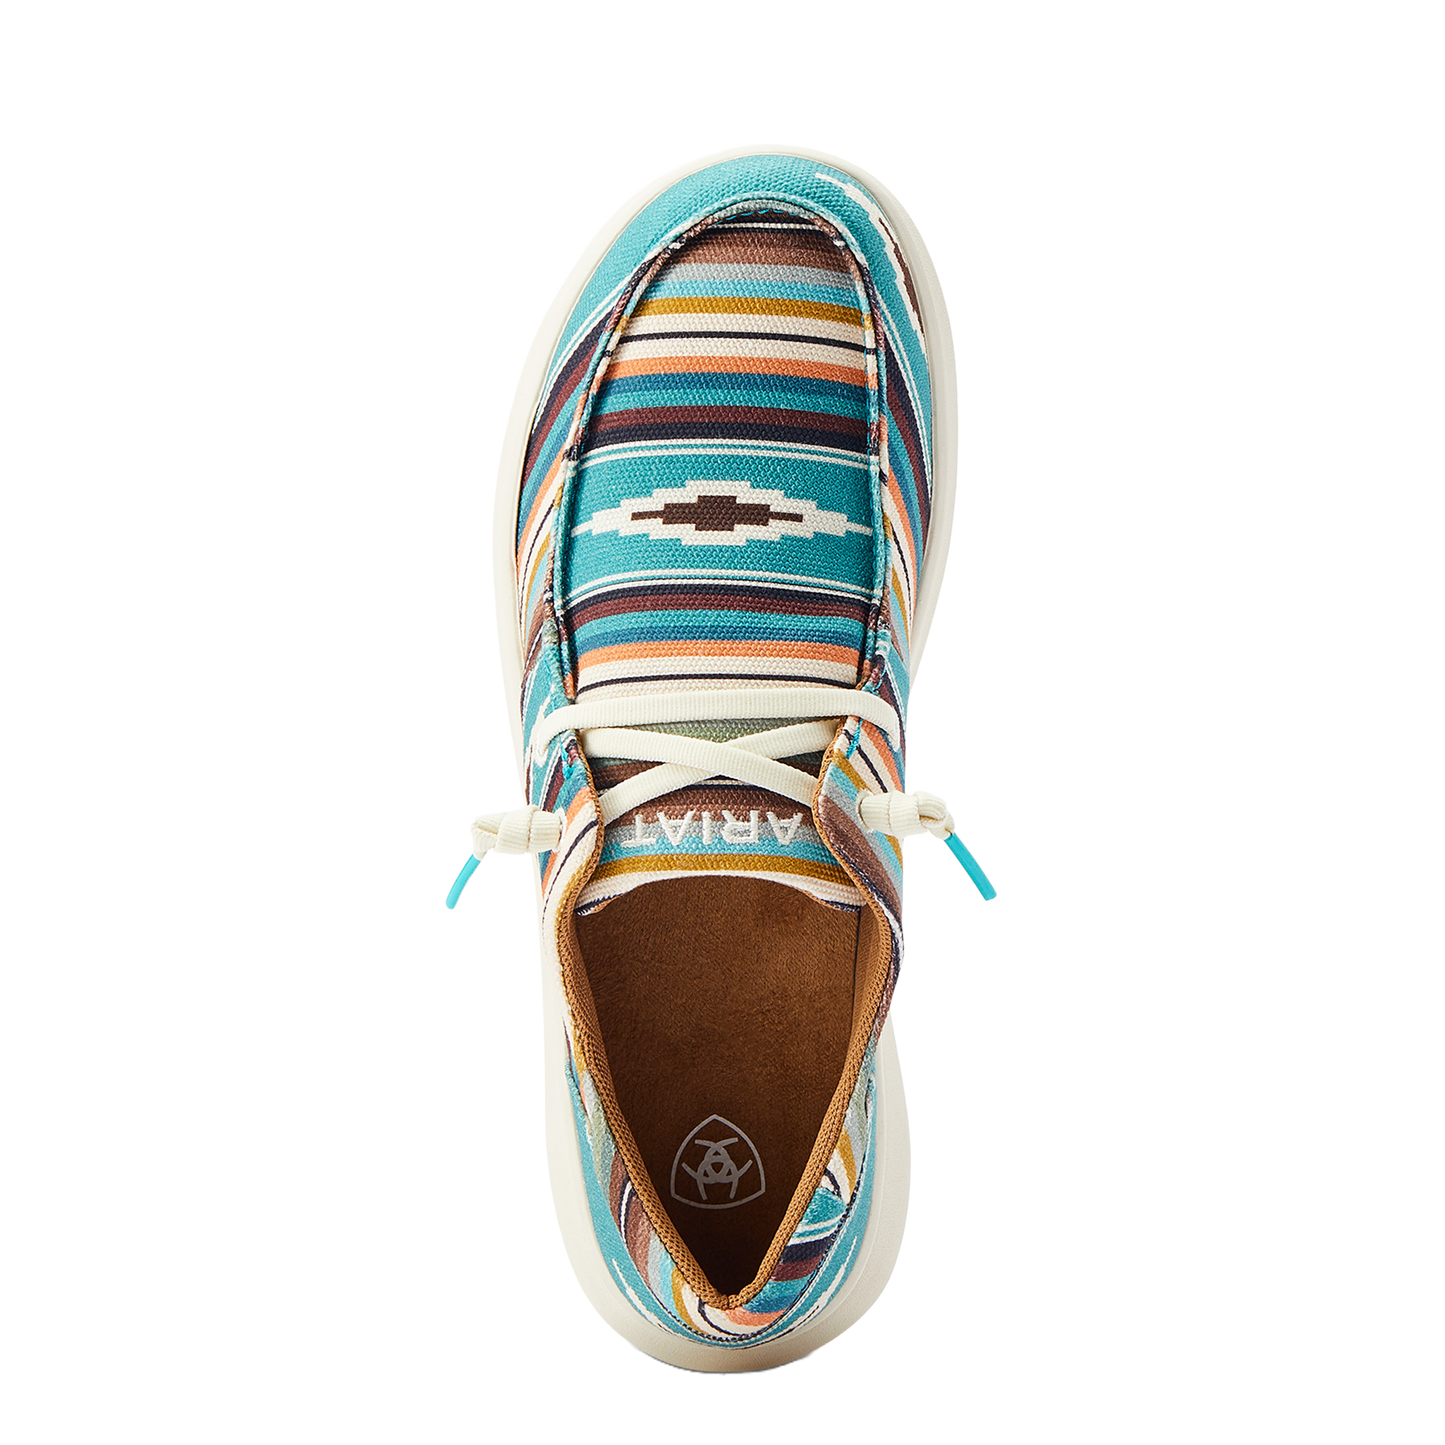 Load image into Gallery viewer, Ariat® Ladies Hilo Turquoise Serape Print Slip On Shoes 10044590
